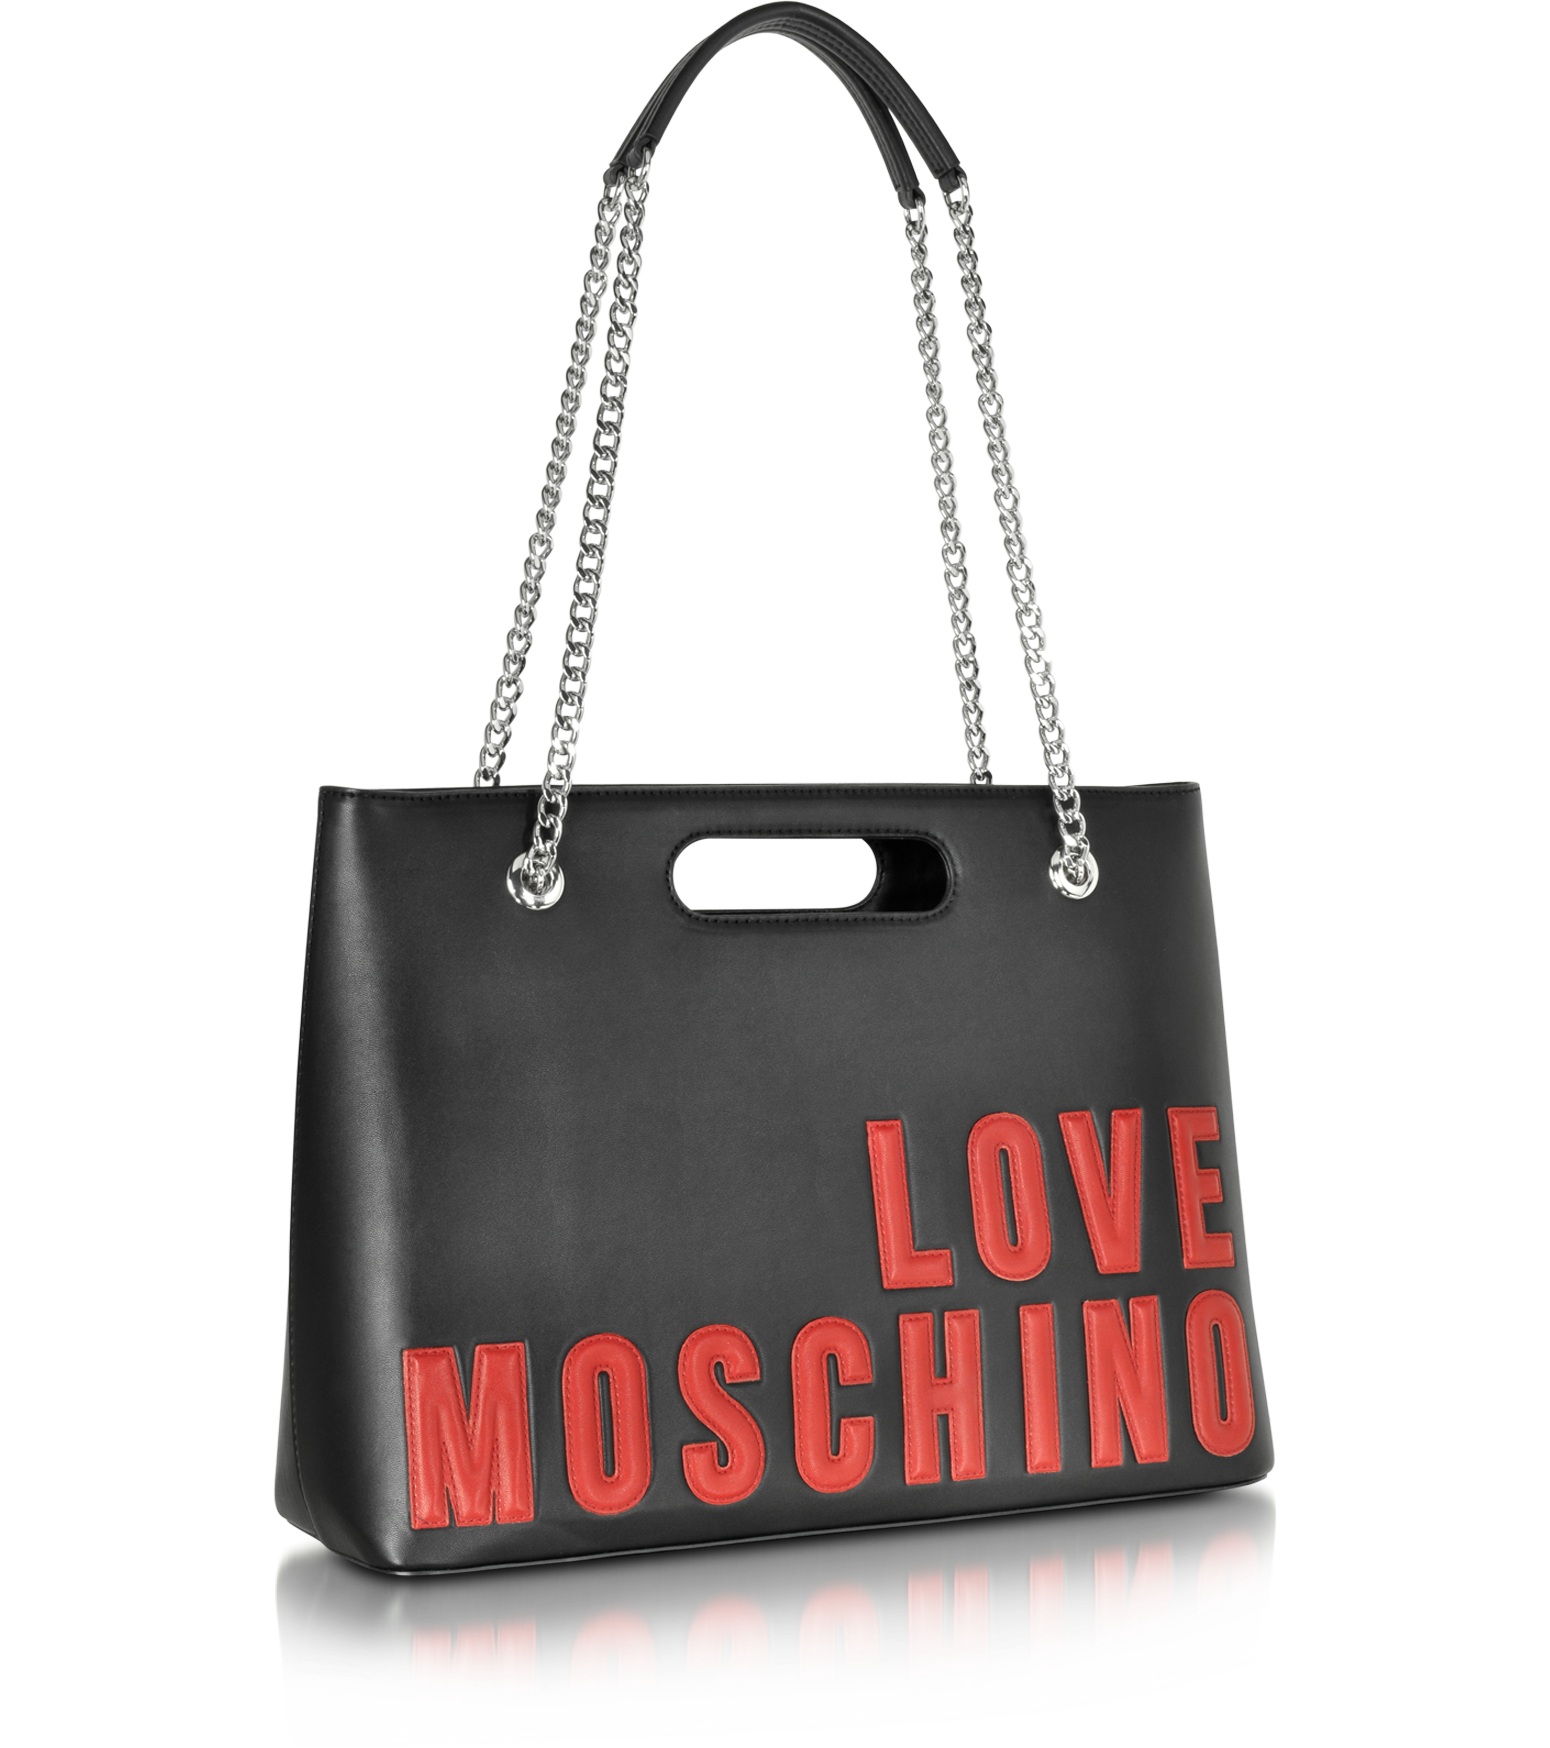 Love Moschino Large Black Eco Leather Tote at FORZIERI